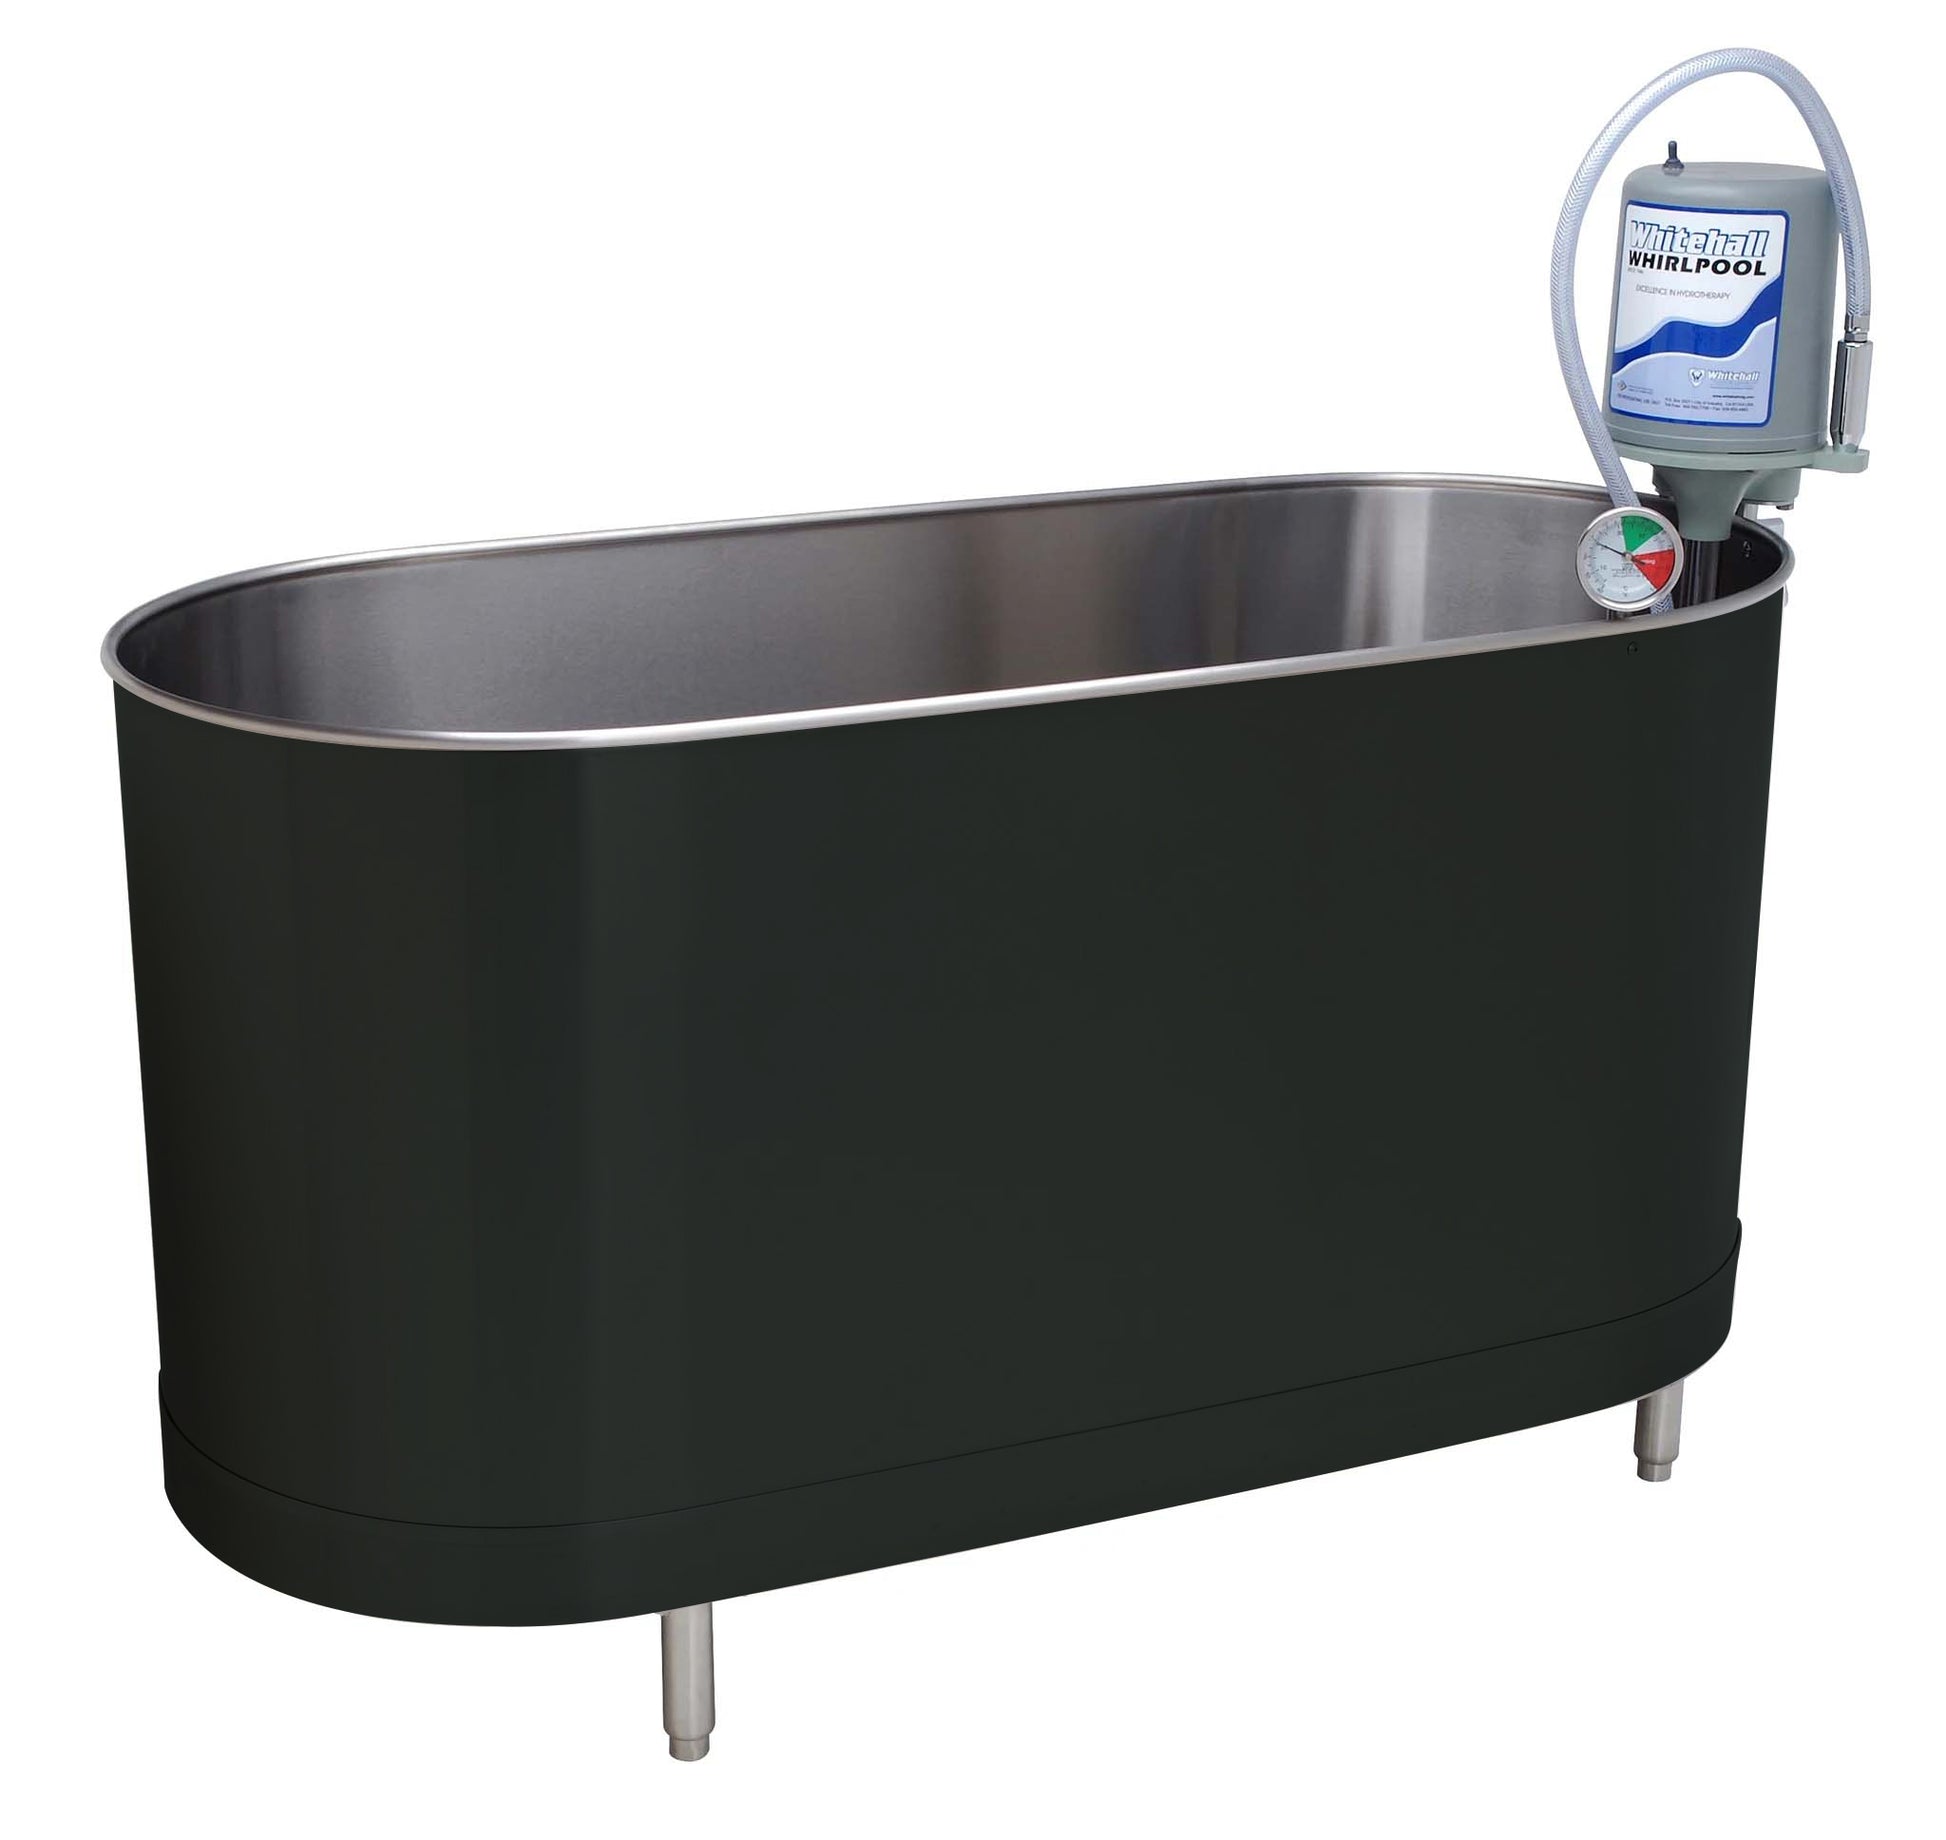 Textured Onyx Whitehall S-85-SL 85 Gallons Stationary Whirlpool with Legs